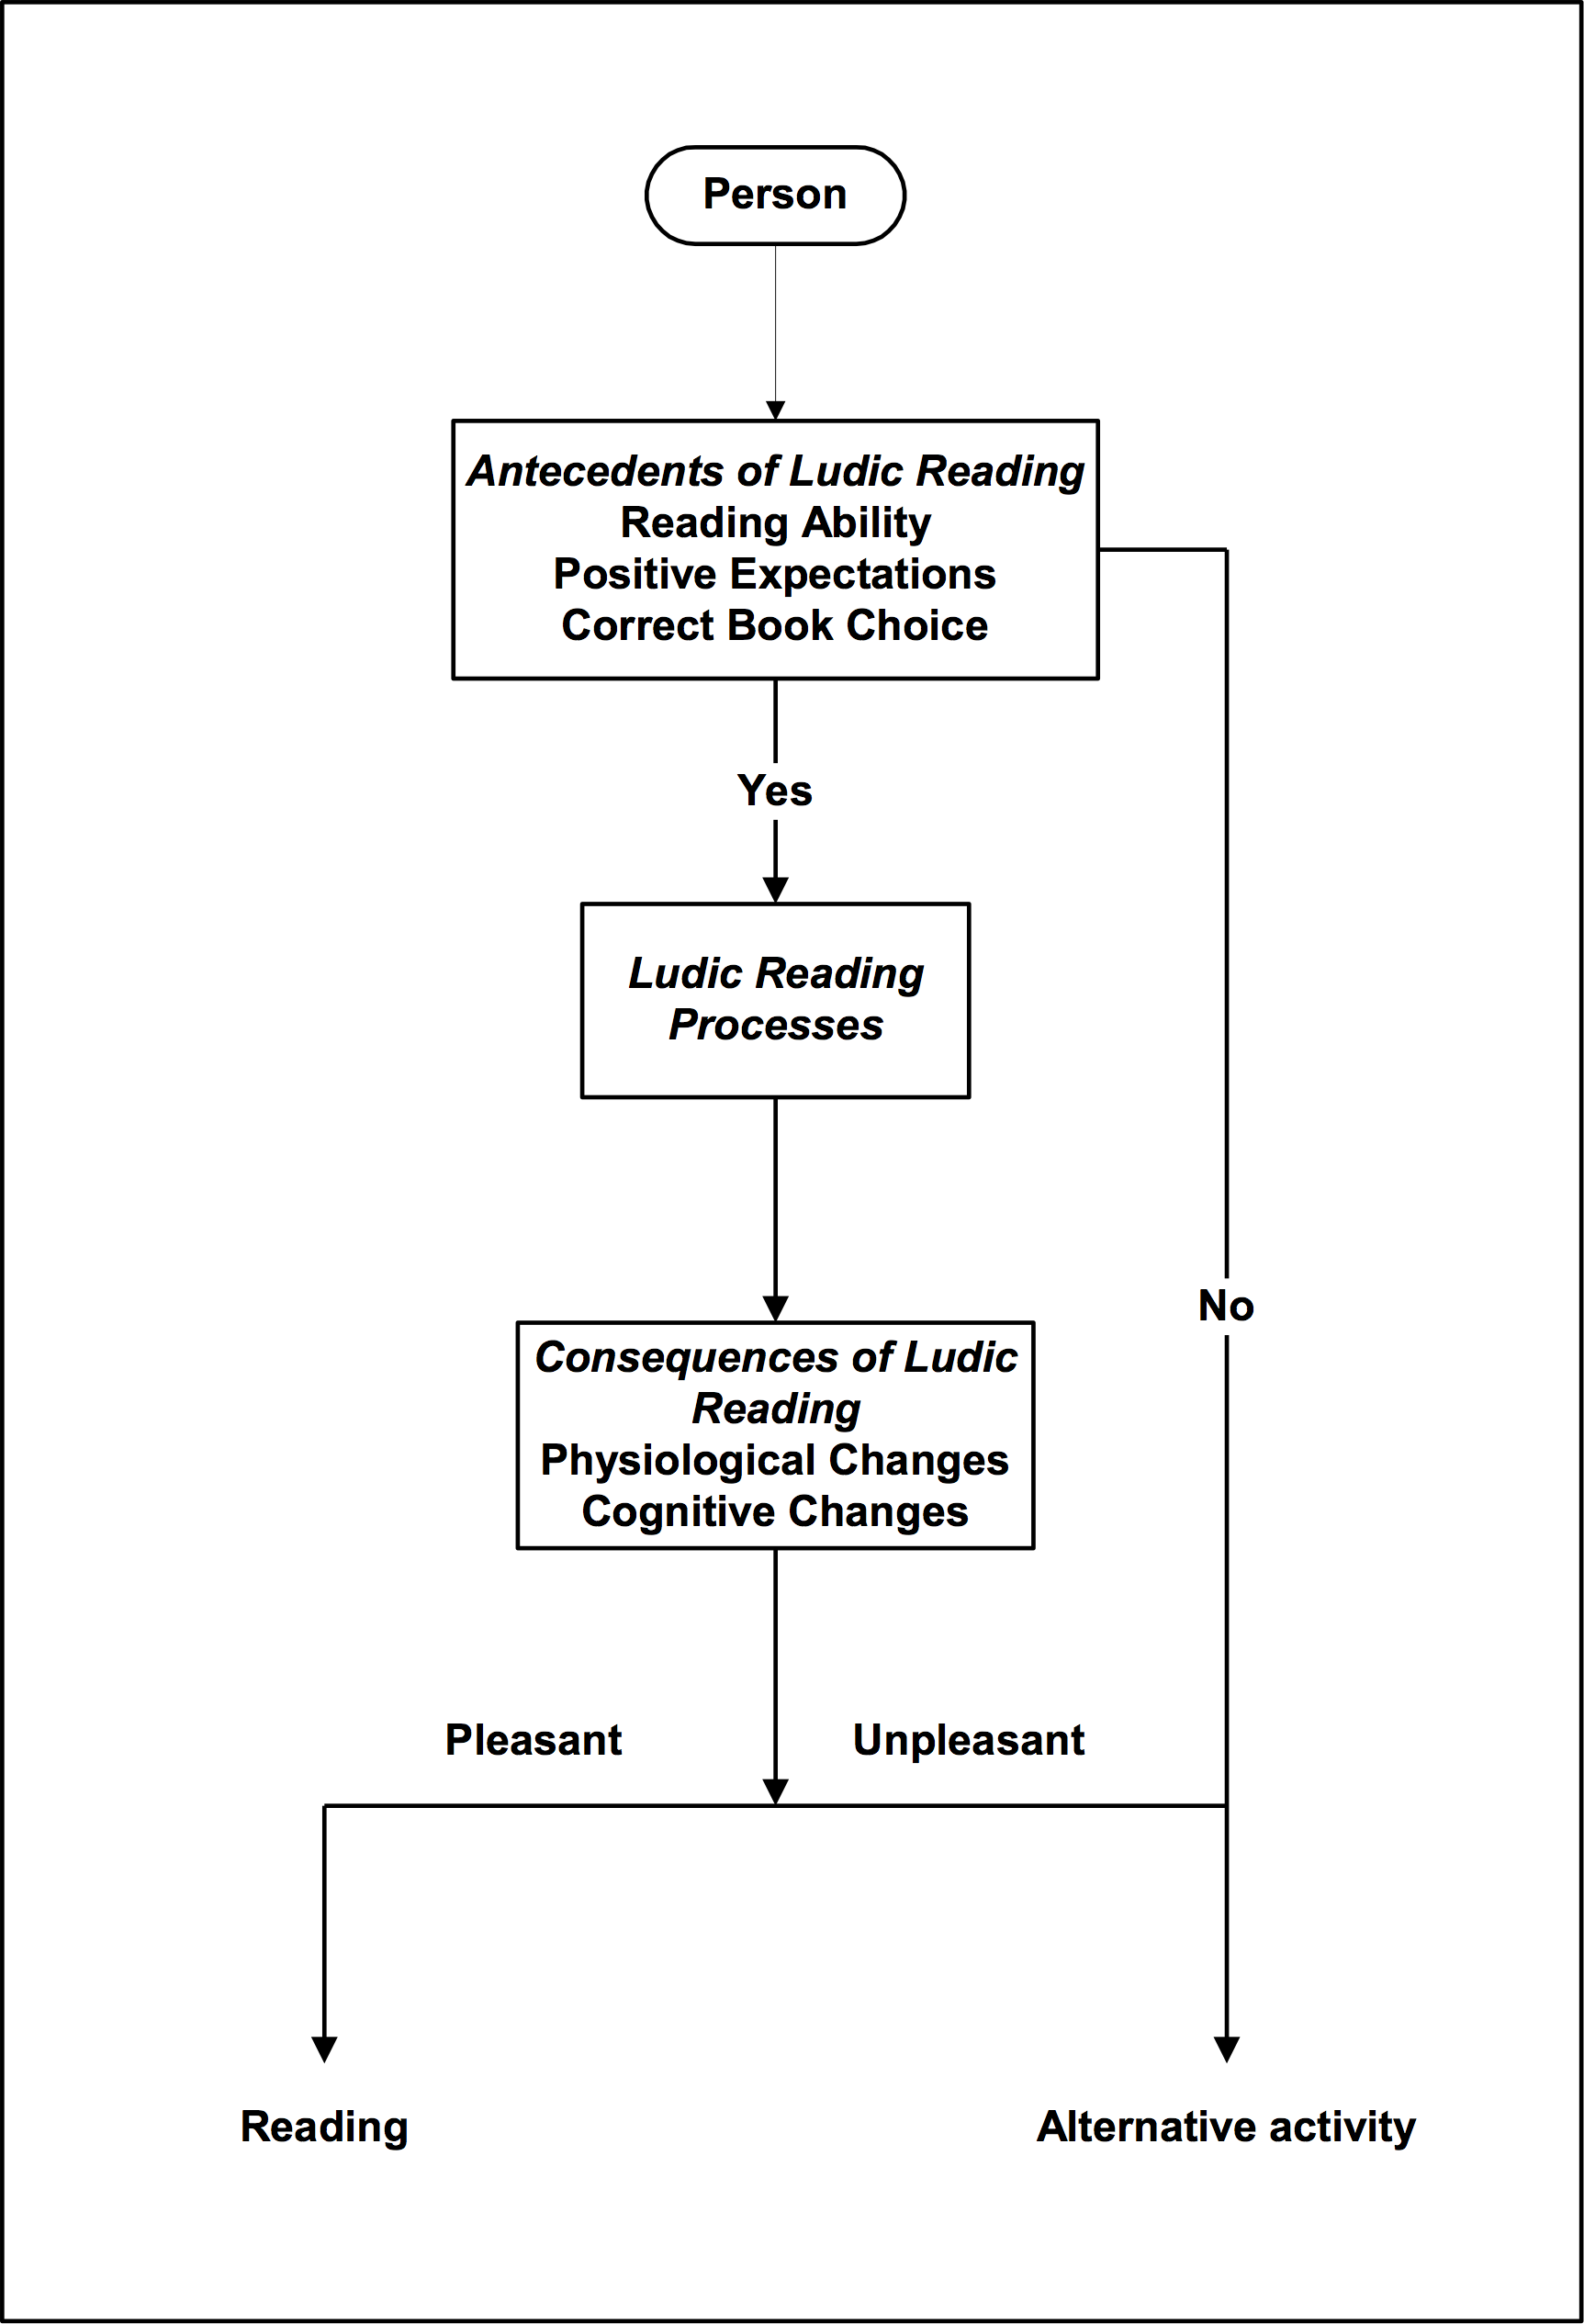 Nell’s preliminary model of Ludic Reading